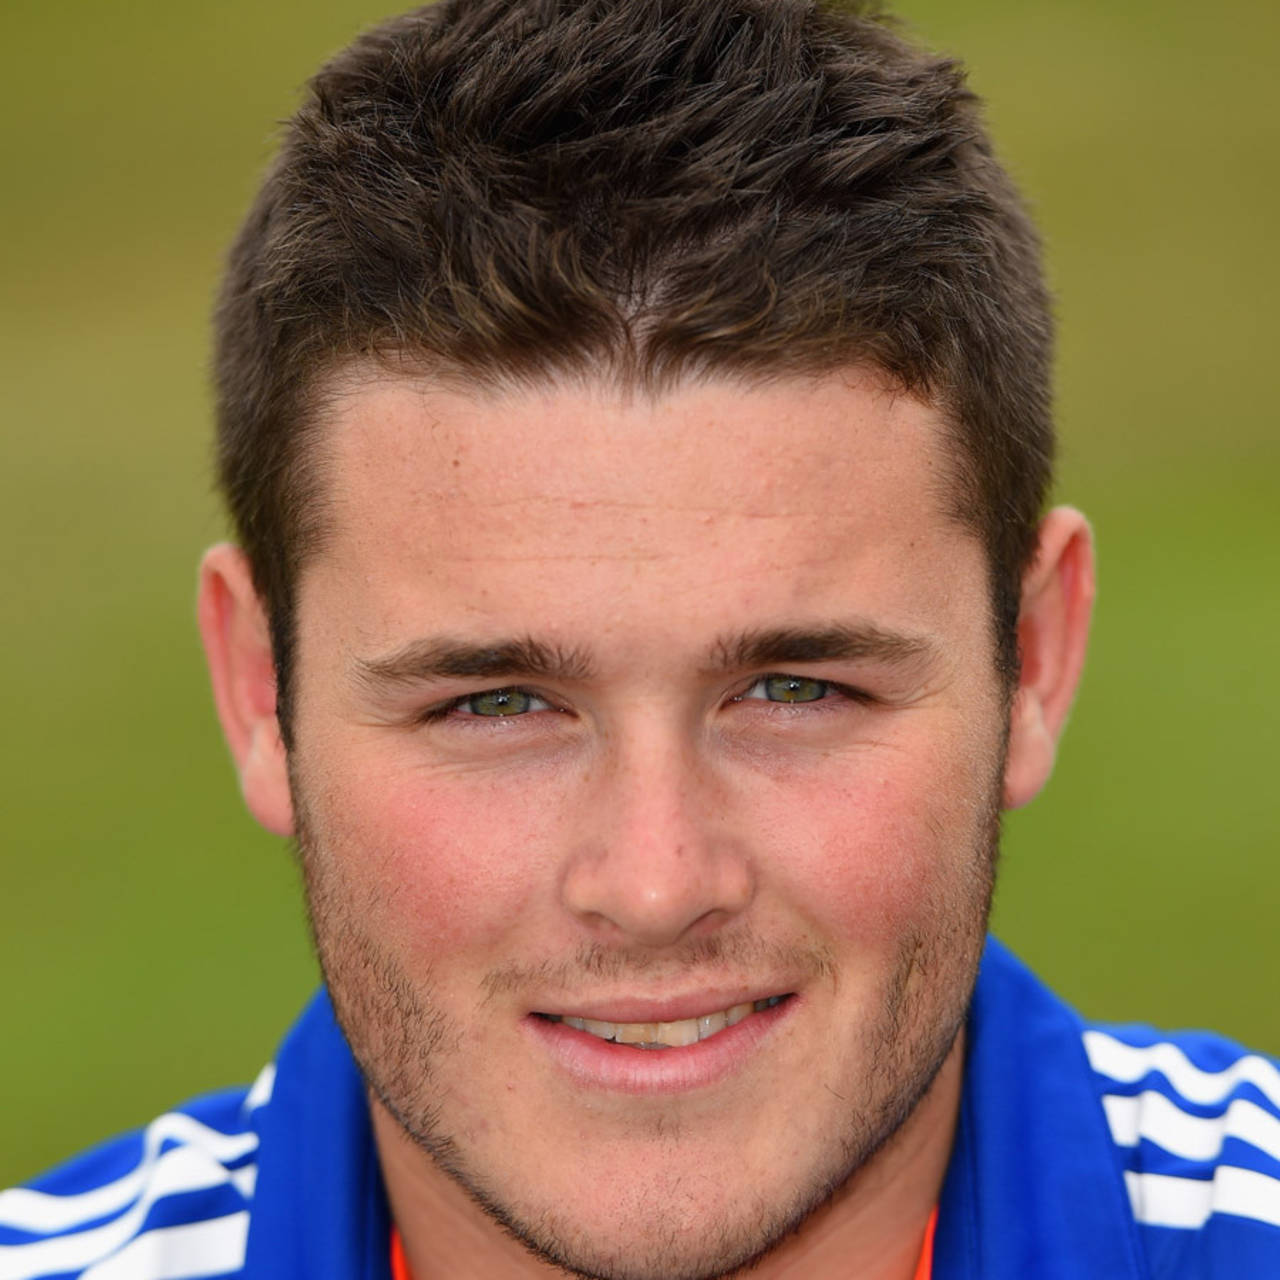 Aaron Thomason of England poses for a portrait prior to the U19 One Day International match between England U-19 and Australia U-19 at The County Ground on August 17, 2015 in Derby, England